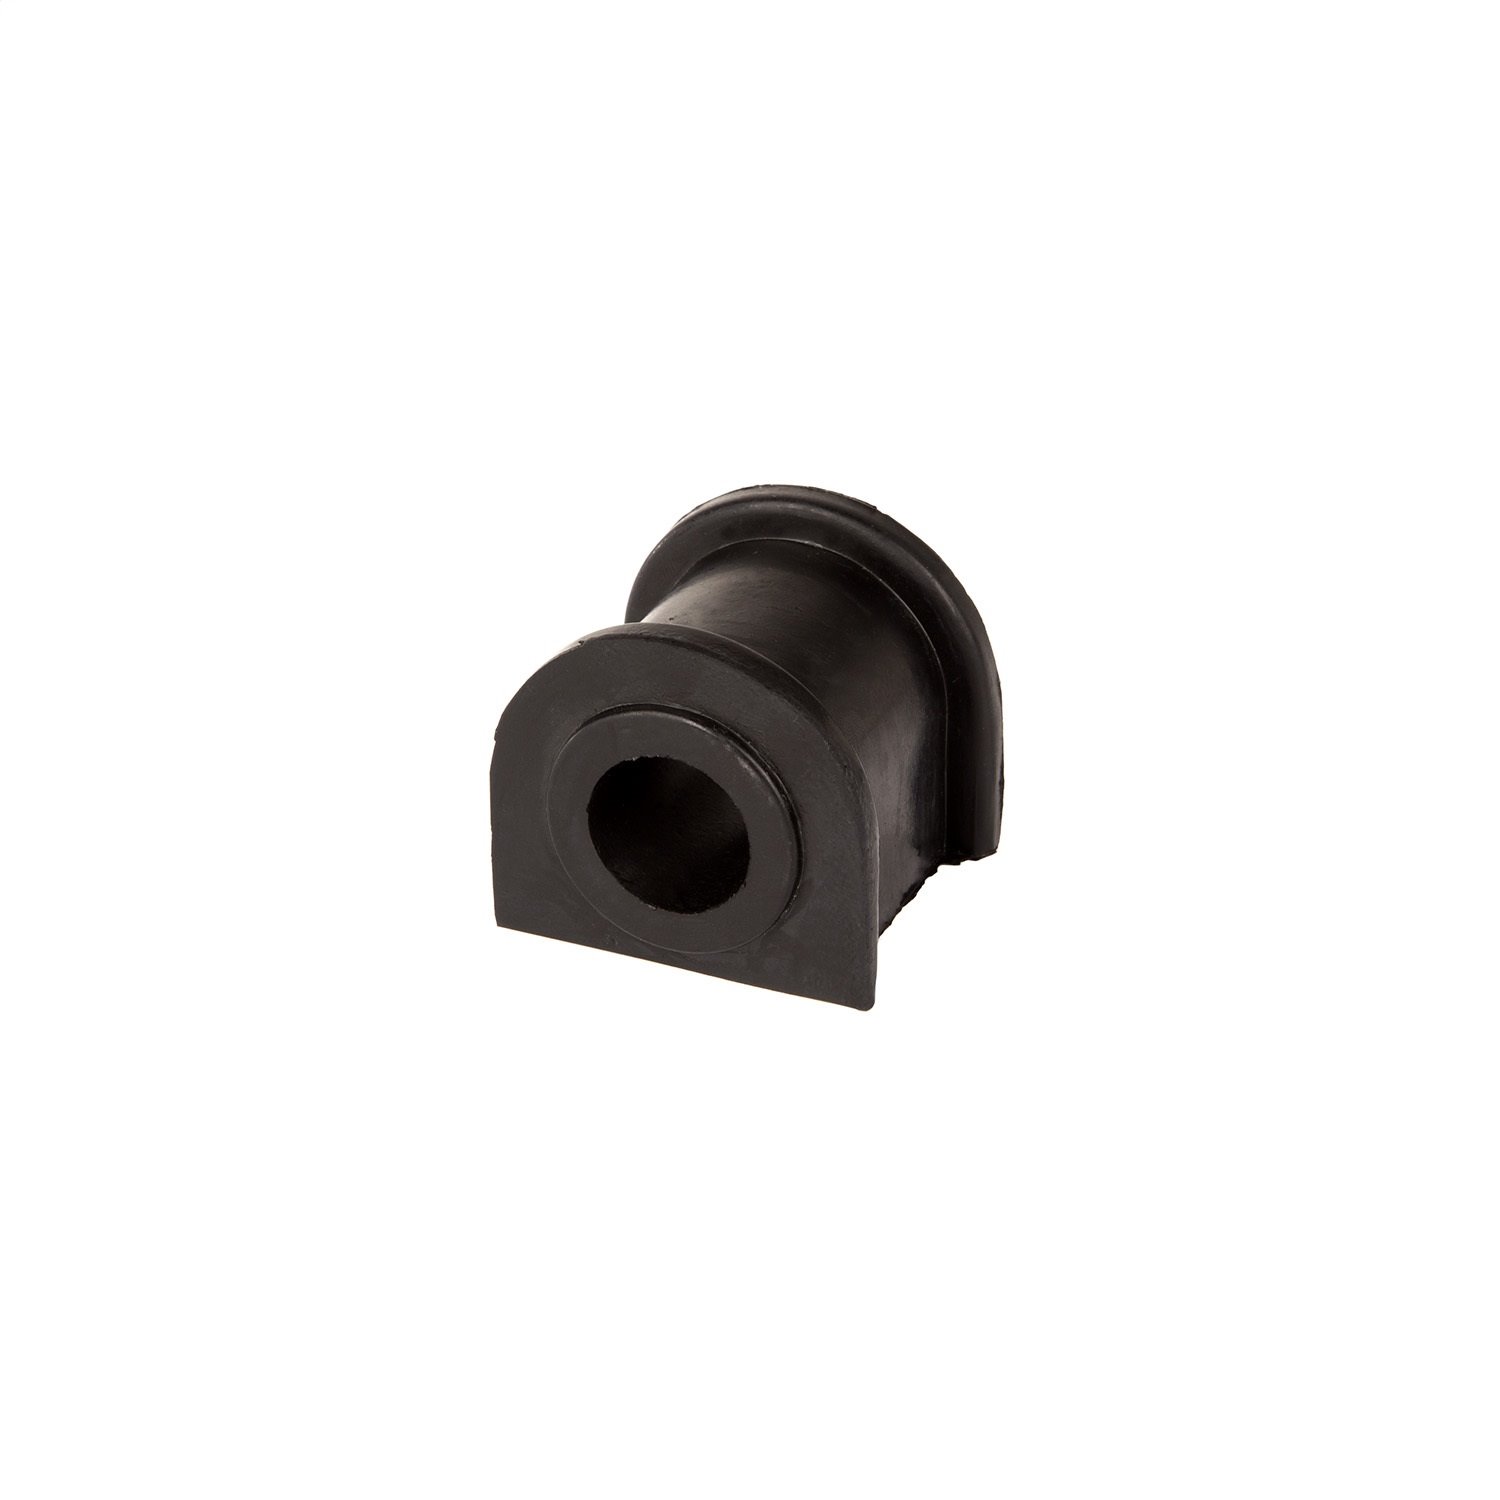 Replacement front sway bar bushing from Omix-ADA, Fits 76-83 Jeep CJ5 76-86 CJ7 and 81-86 CJ8